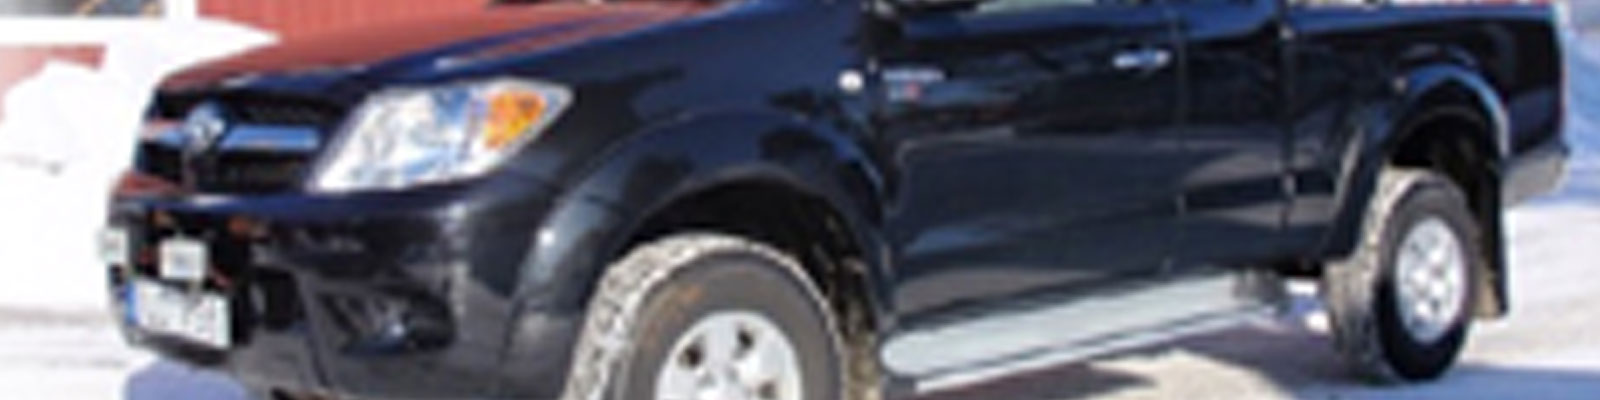 Accessories for Toyota Hilux Extra Cab 2005-2011